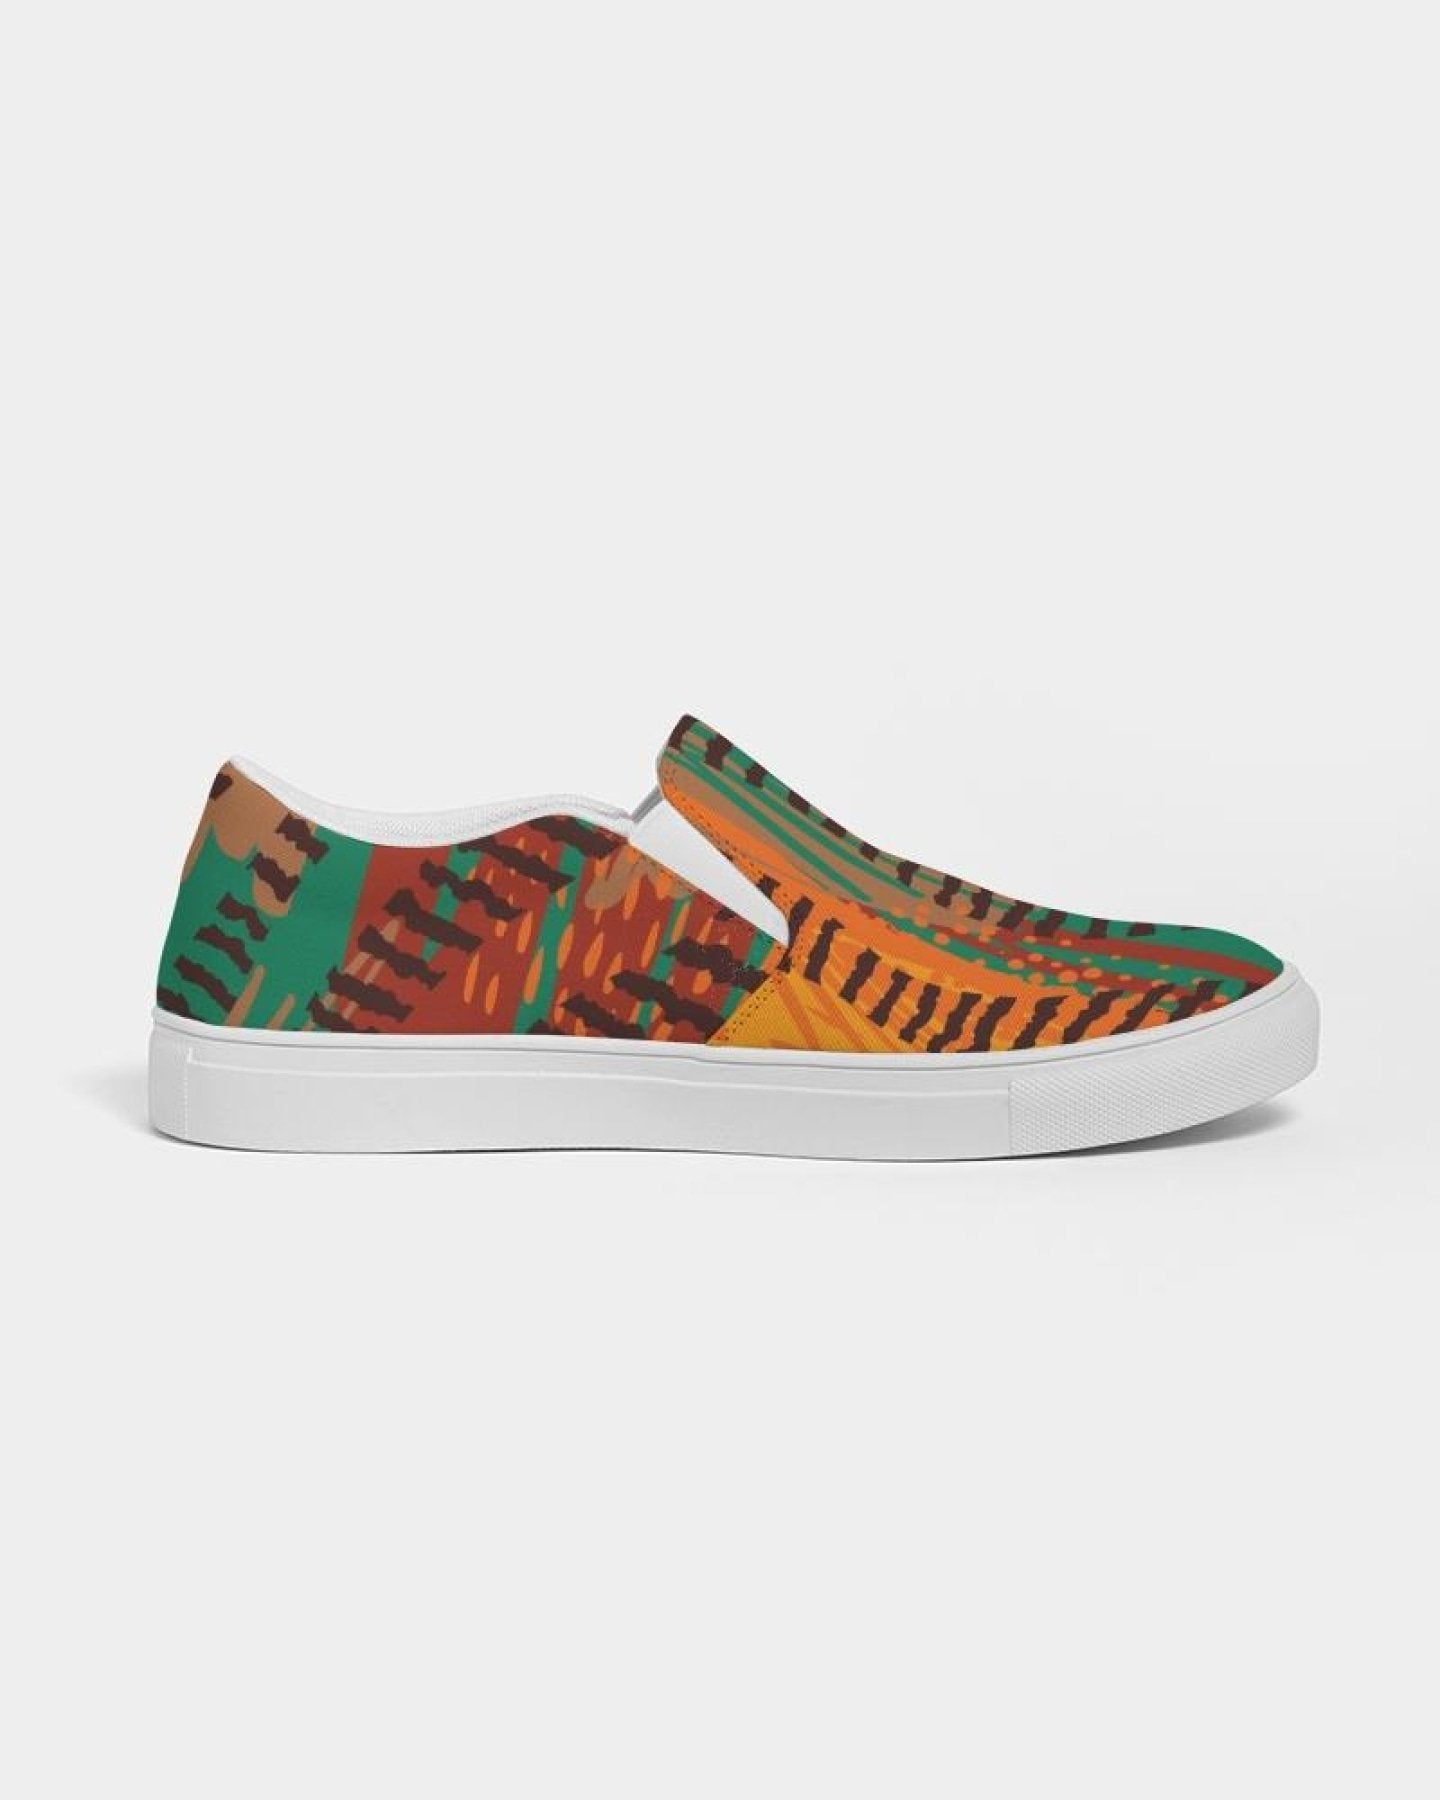 Uniquely You Womens Sneakers - Brown & Green Low Top Slip-On Canvas